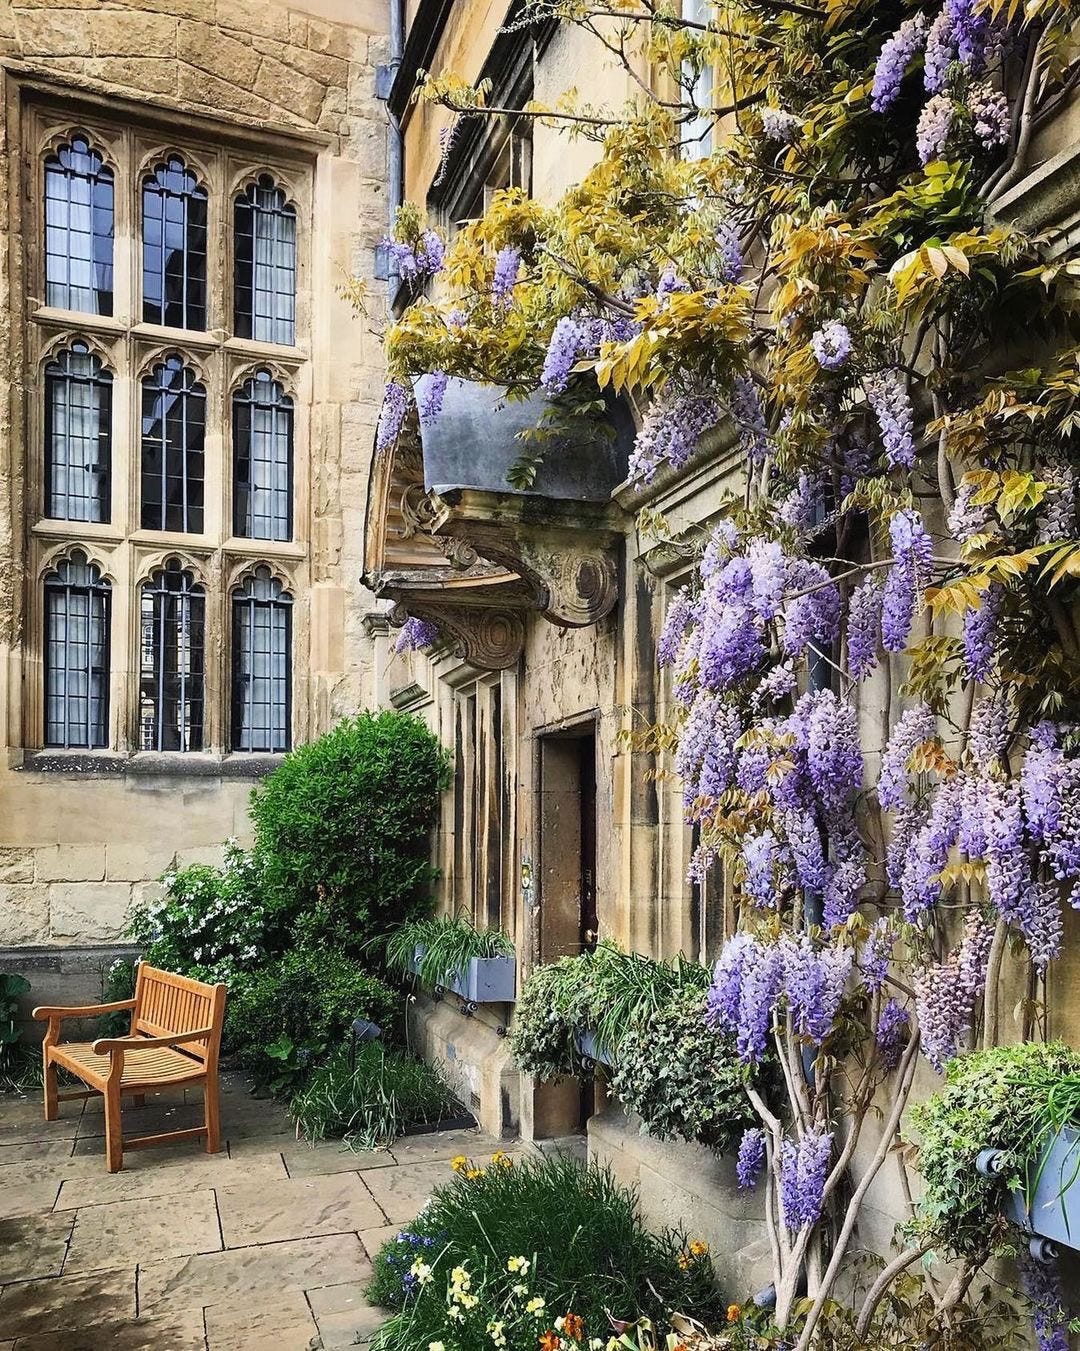 The Jesus College wisteria. Photo by Spiralling Oxford